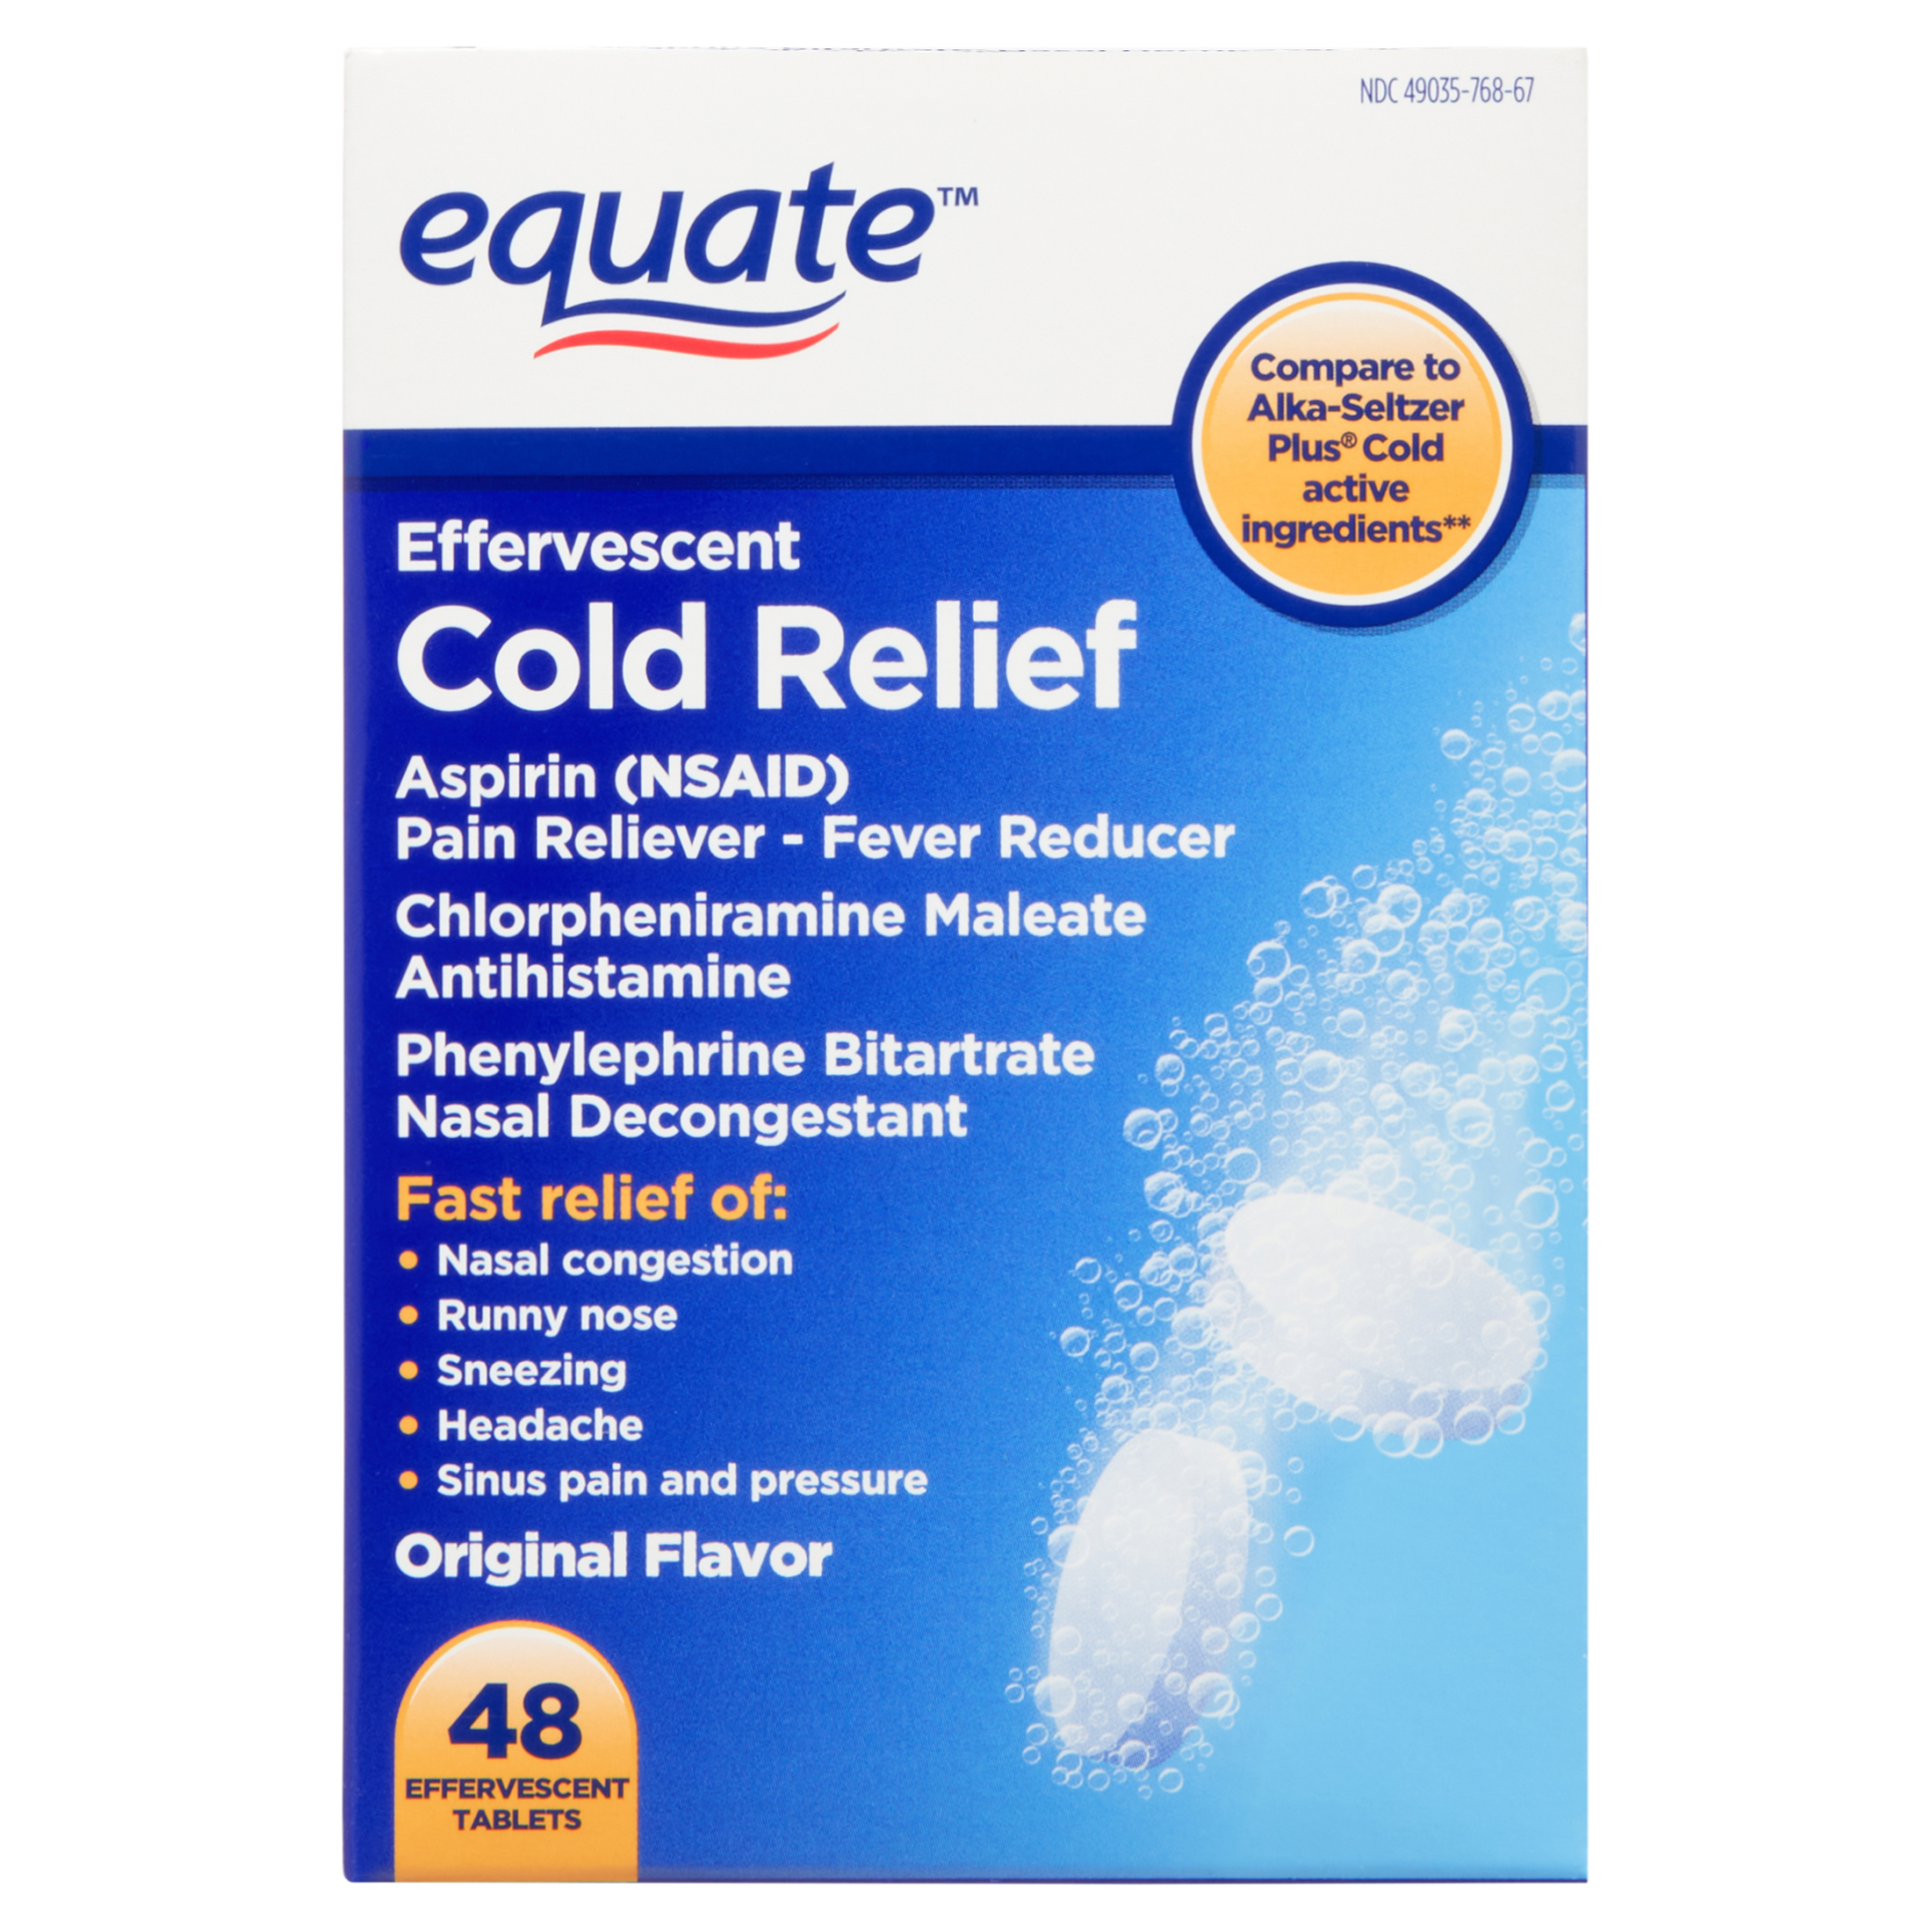 Equate Effervescent Cold Relief, 48 Tablets - image 1 of 9